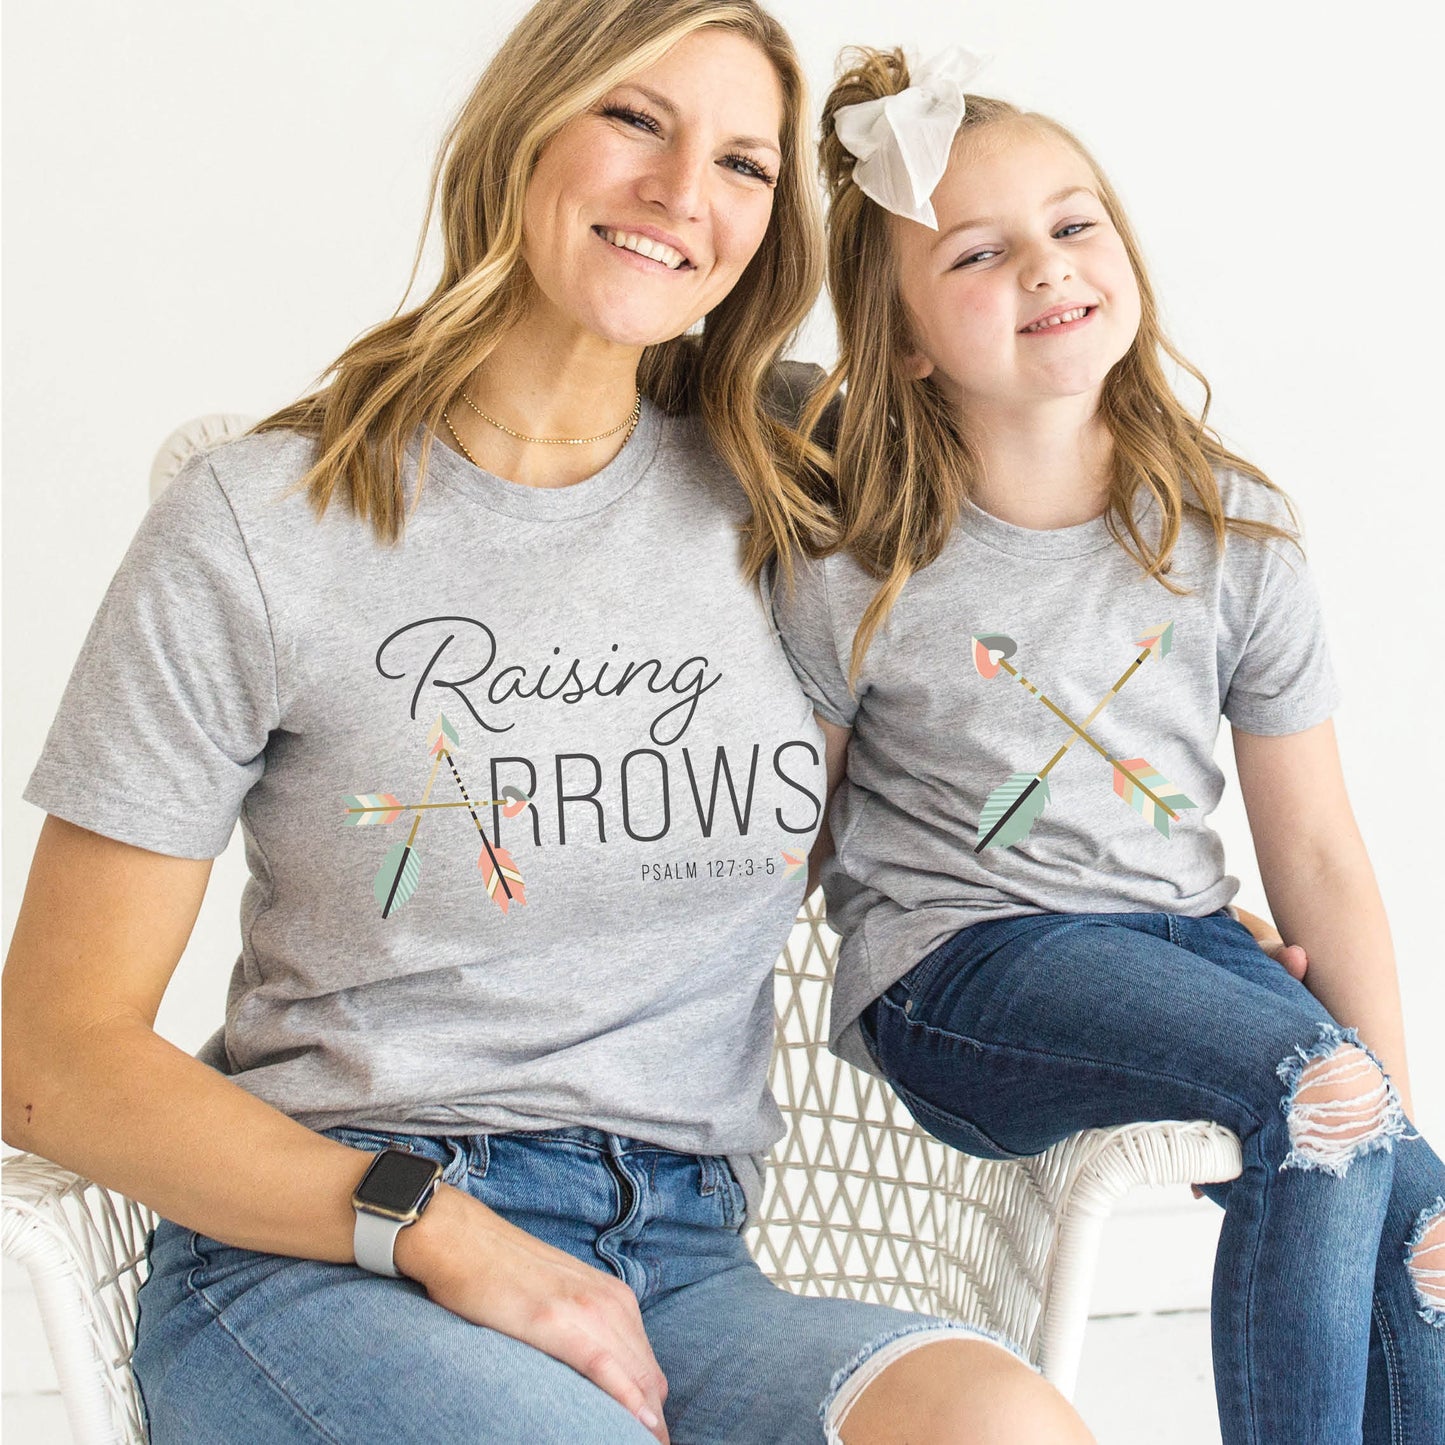 Heather gray and pastel boho arrow Christian aesthetic faith-based t-shirt and matching mommy-and-me youth toddler tee with Psalm 127:3-5 bible verse quote that says "Raising Arrows" blessed is the one with a quiver full of children, perfect for homeschool moms and kids